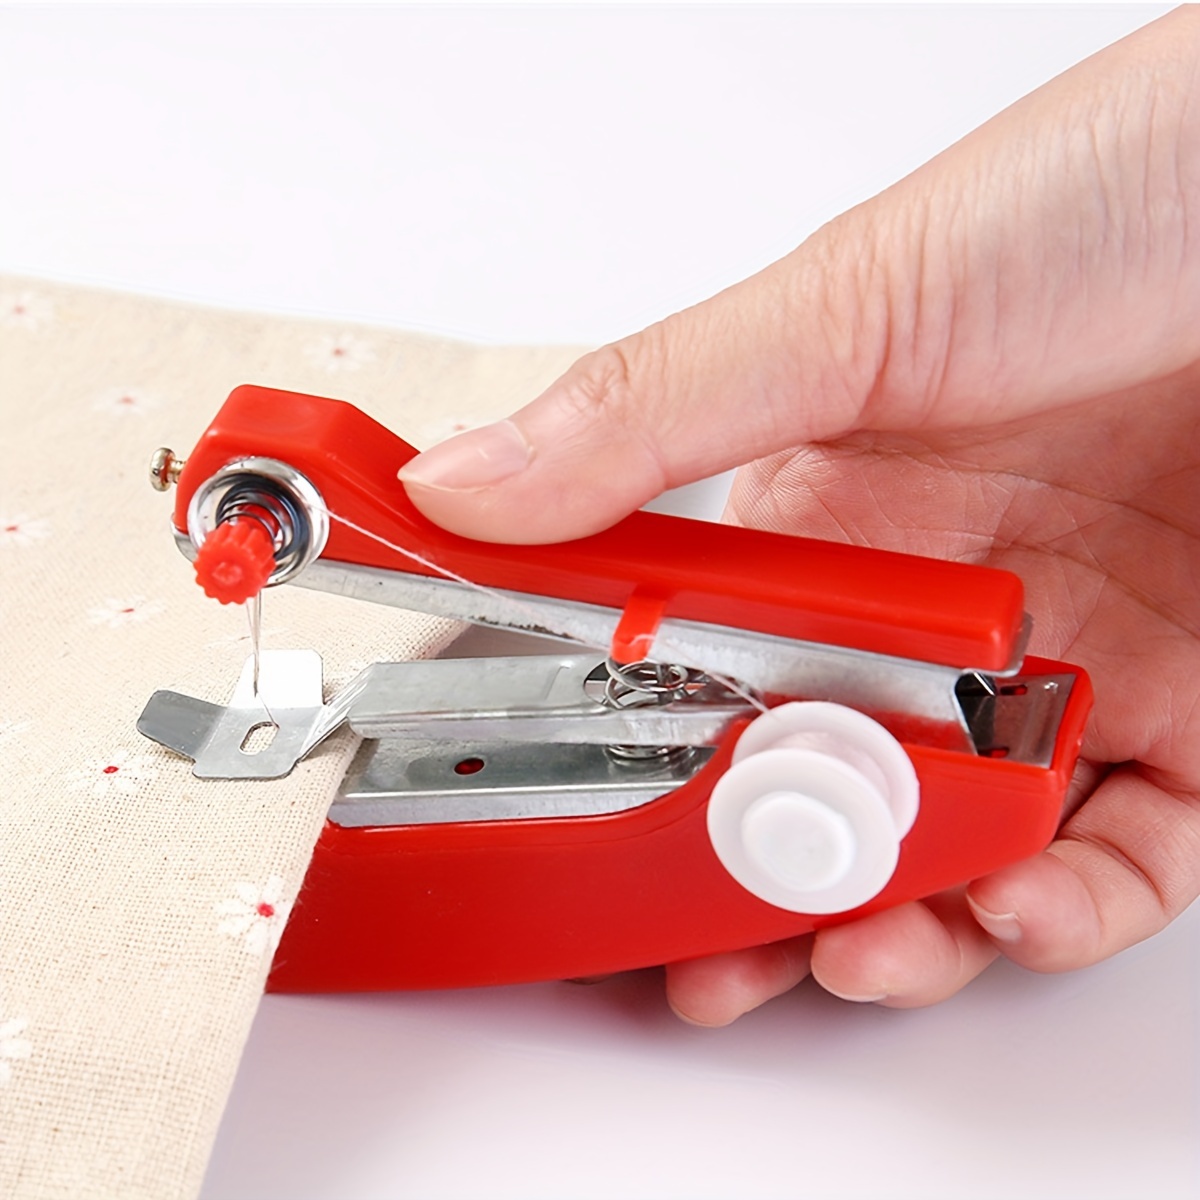 

Compact Portable Mini Sewing Machine - Pocket-sized Manual Stitching Tool For Quick Clothing Repairs, Metal Construction